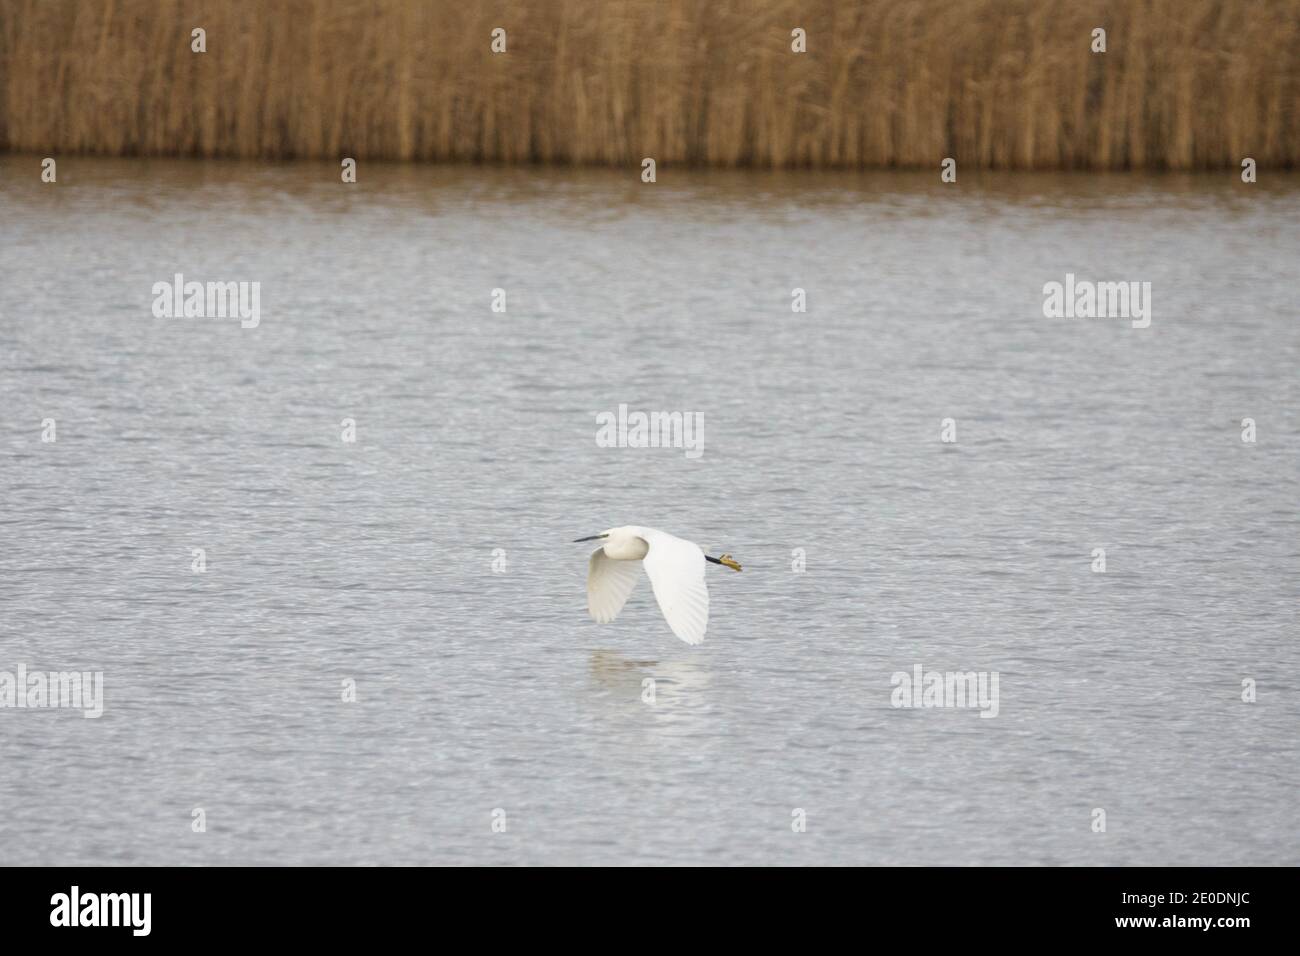 Great Egret (Casmerodius albus) in flight over a lake in England, UK. egret flying over water with reeds in the background. Stock Photo